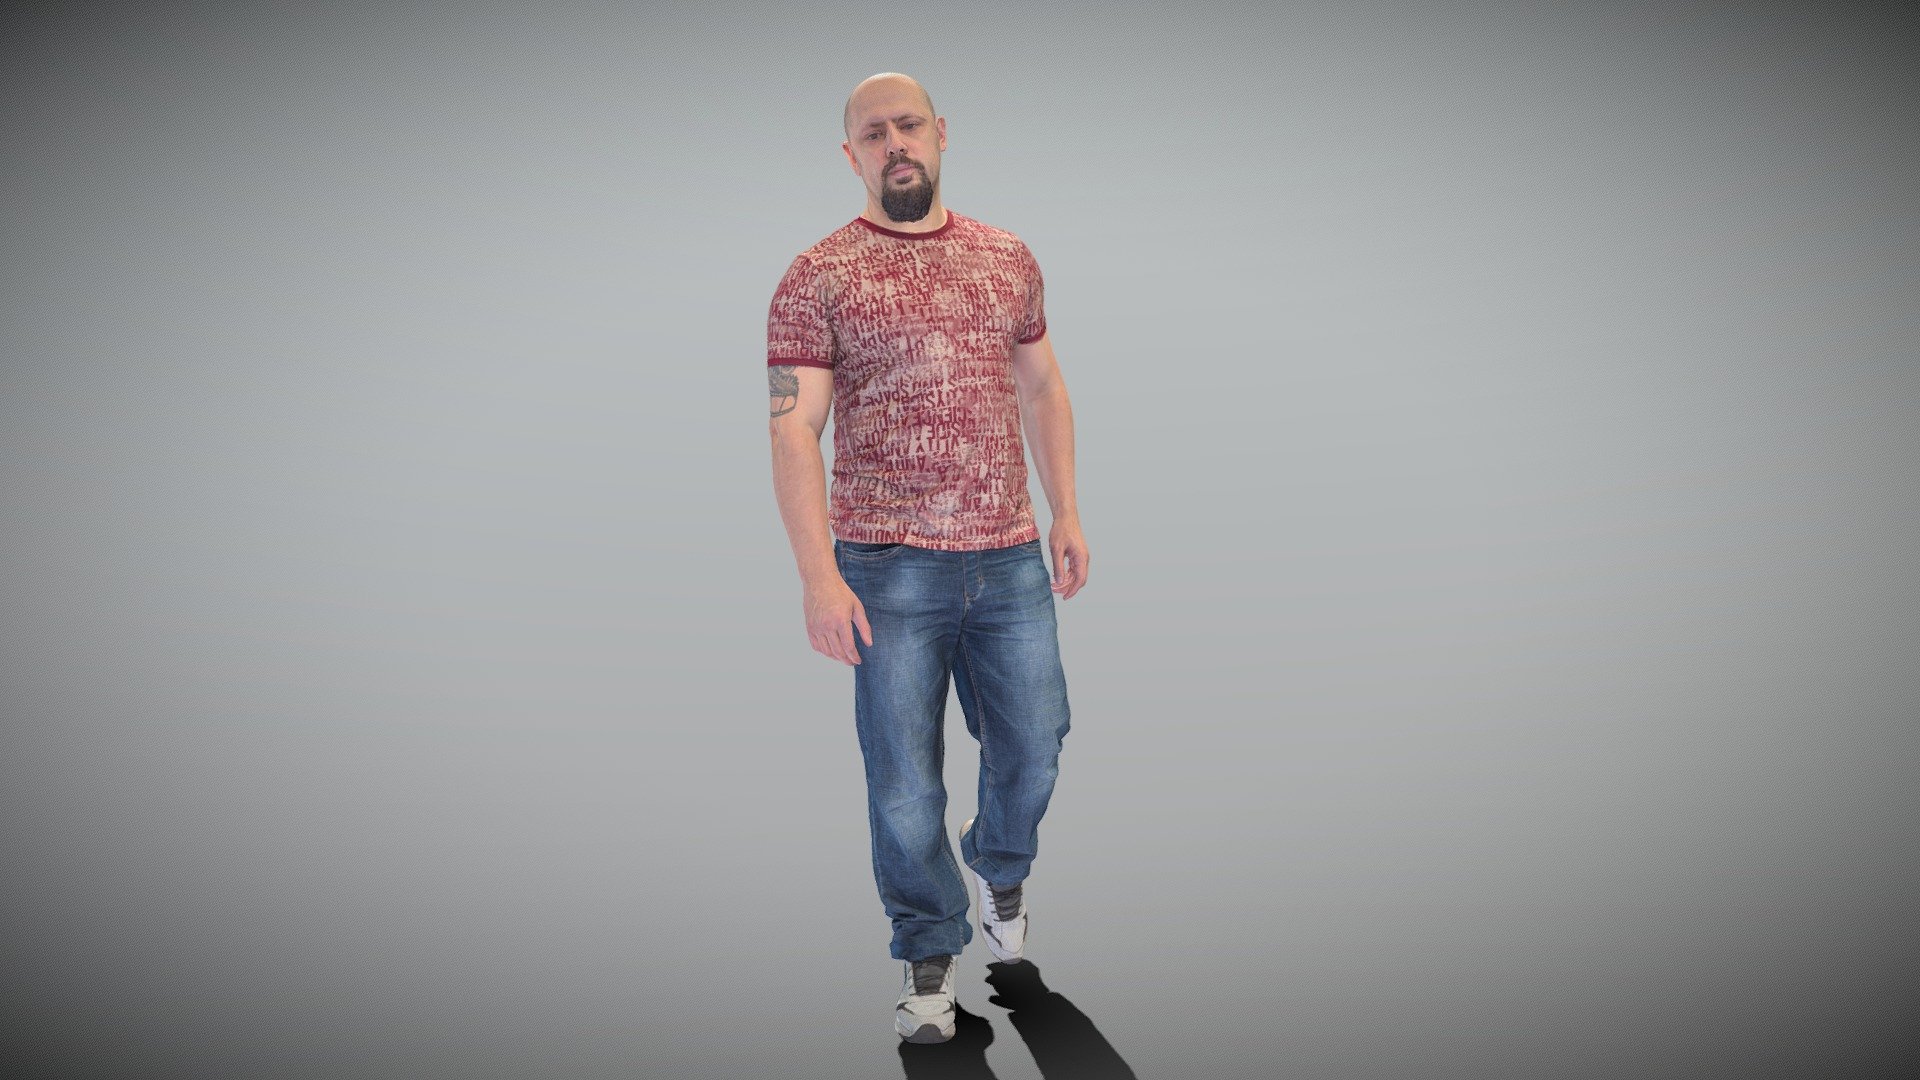 This is a true human size and detailed model of a handsome young man of Caucasian appearance dressed in casual style. The model is captured in casual pose to be perfectly matching to variety of architectural visualization, background character, product visualization e.g. urban installations, city designs, outdoor design presentations, VR/AR content, etc.

Technical specifications:




digital double 3d scan model

150k &amp; 30k triangles | double triangulated

high-poly model (.ztl tool with 4-5 subdivisions) clean and retopologized automatically via ZRemesher

sufficiently clean

PBR textures 8K resolution: Diffuse, Normal, Specular maps

non-overlapping UV map

no extra plugins are required for this model

Download package includes a Cinema 4D project file with Redshift shader, OBJ, FBX, STL files, which are applicable for 3ds Max, Maya, Unreal Engine, Unity, Blender, etc. All the textures you will find in the “Tex” folder, included into the main archive.

3D EVERYTHING - Bald man walking 358 - Buy Royalty Free 3D model by deep3dstudio 3d model